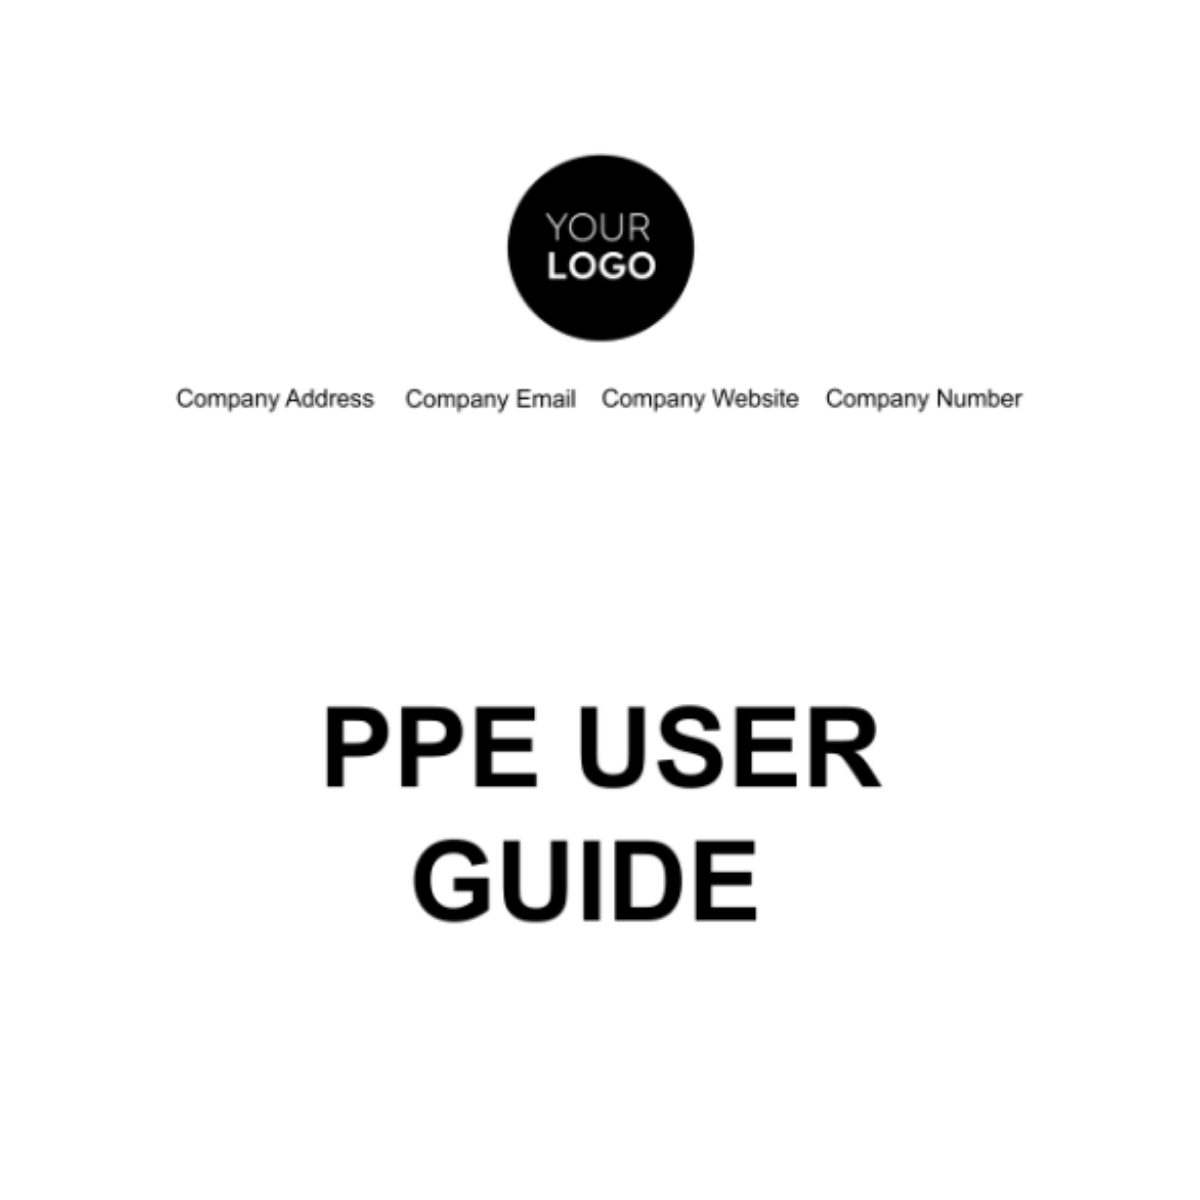 PPE User Guide Template